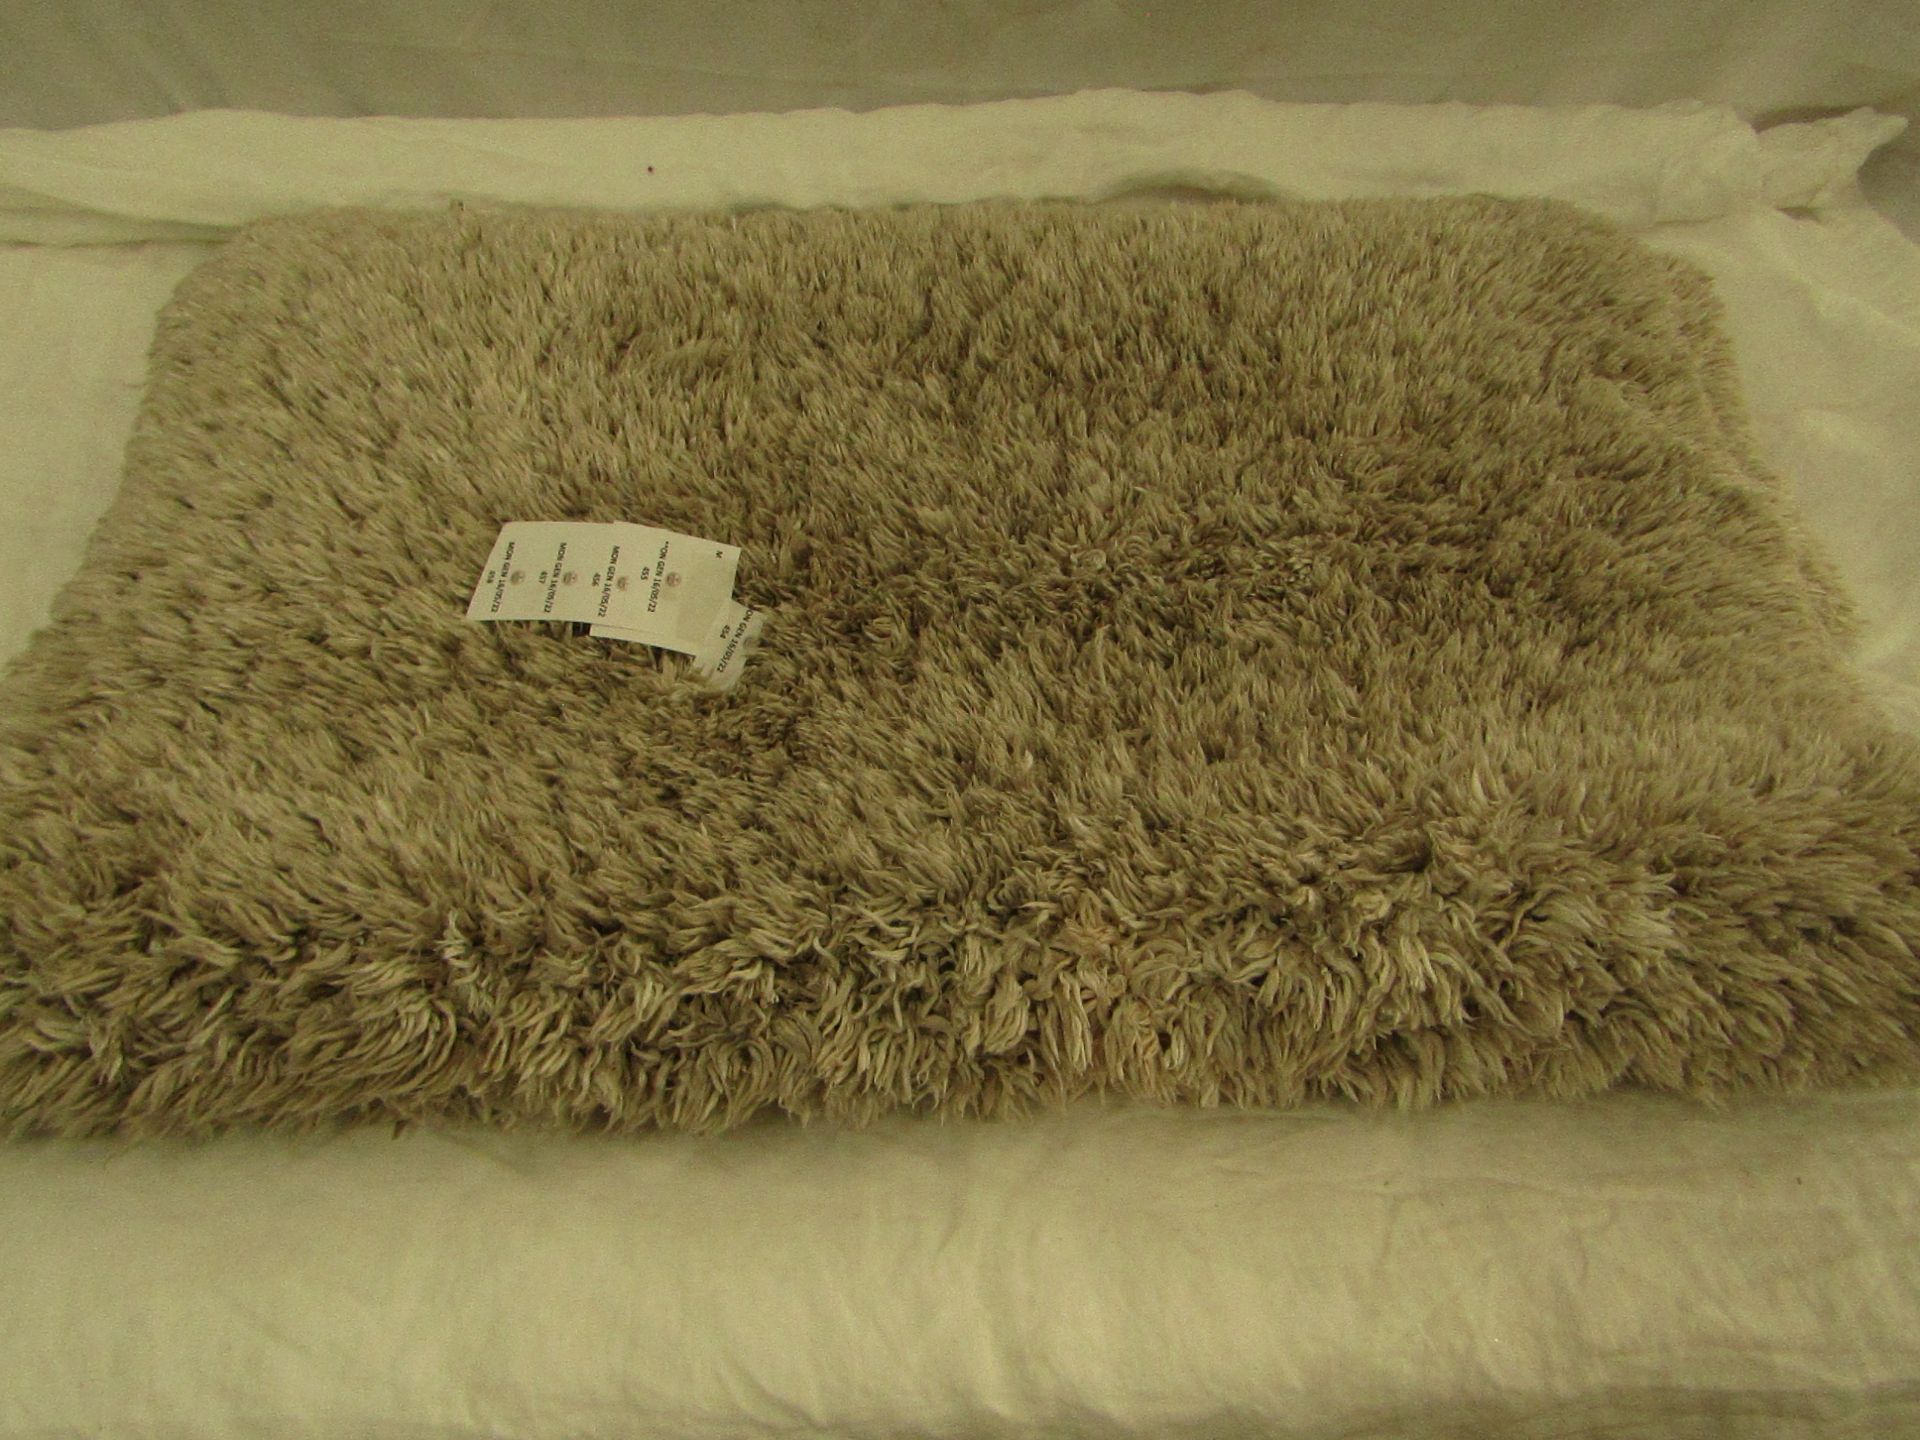 Confetti - Accent Rug - White / Beige - ( 70 x 114 cm ) - May Need A Clean, No Packaging.